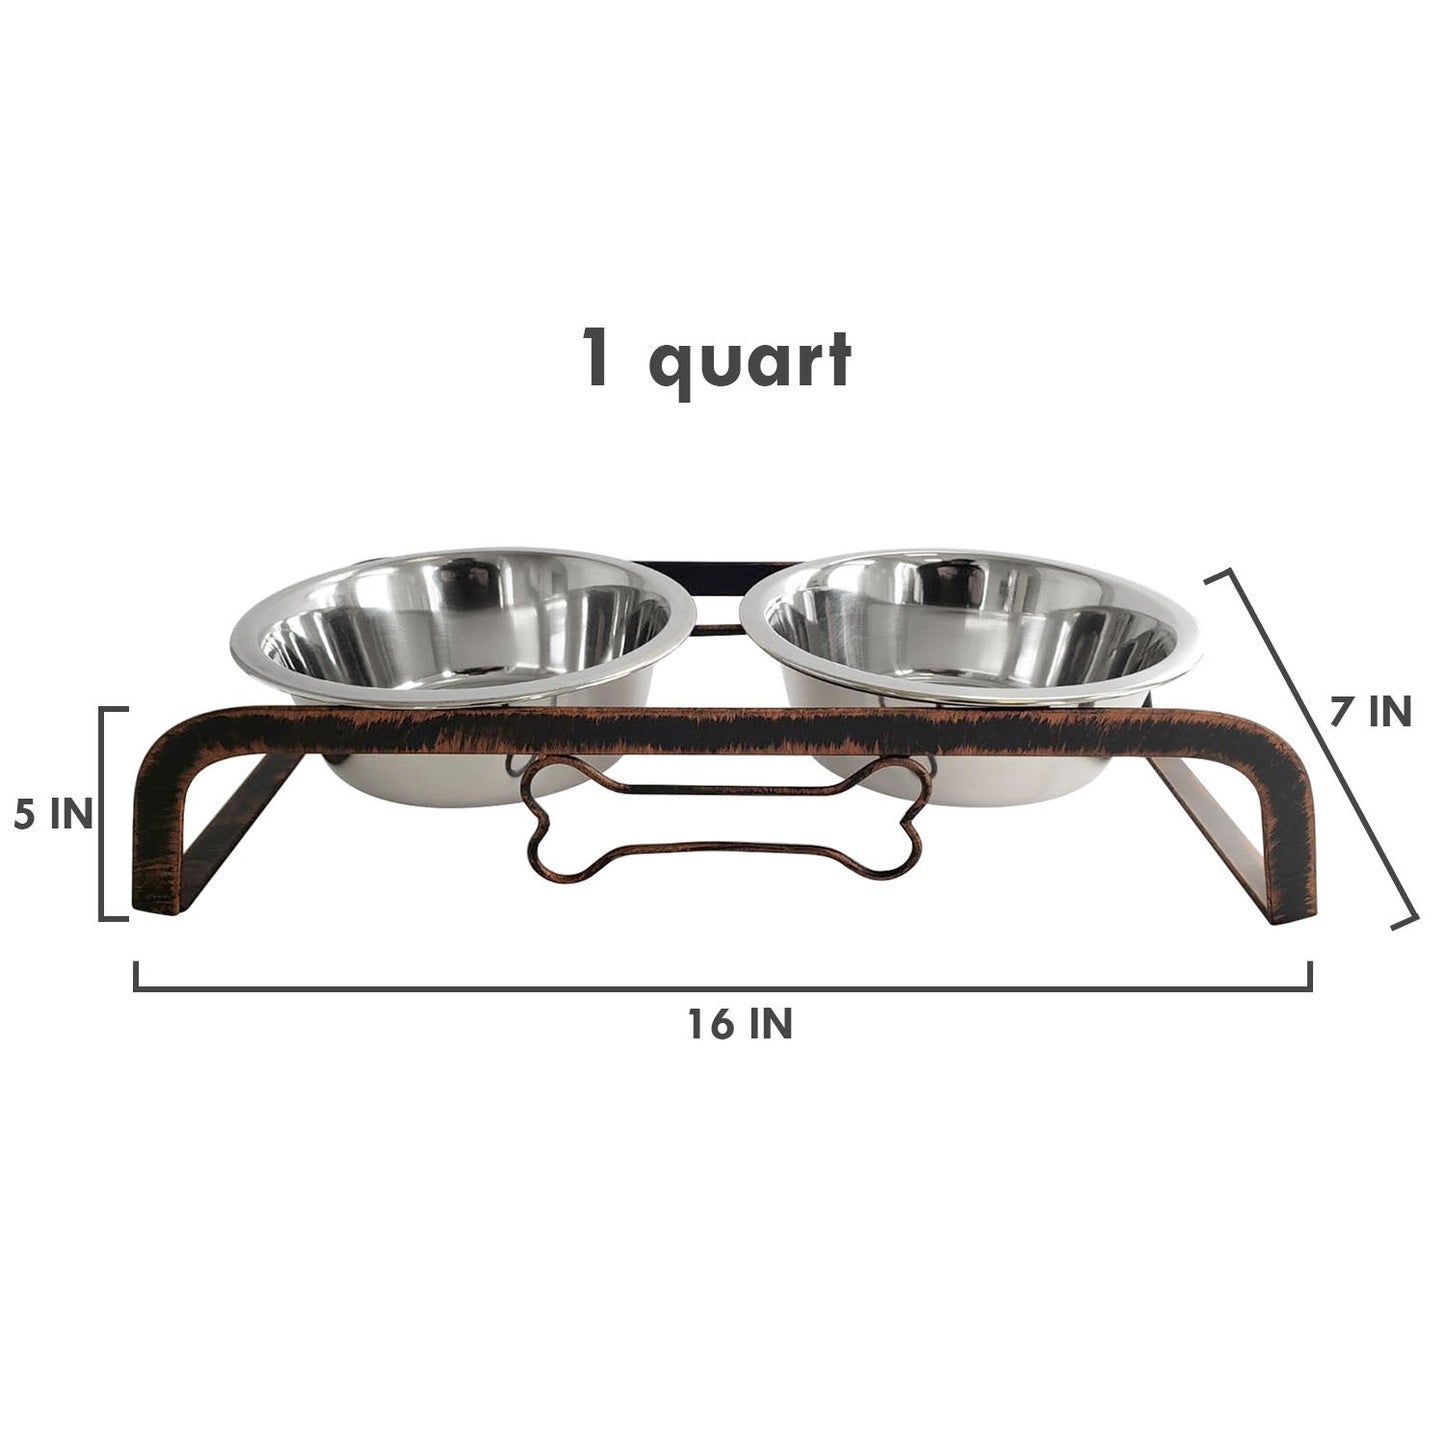 Elevated Rustic Design Dog Bone Feeder with 2 Stainless Steel Bowls